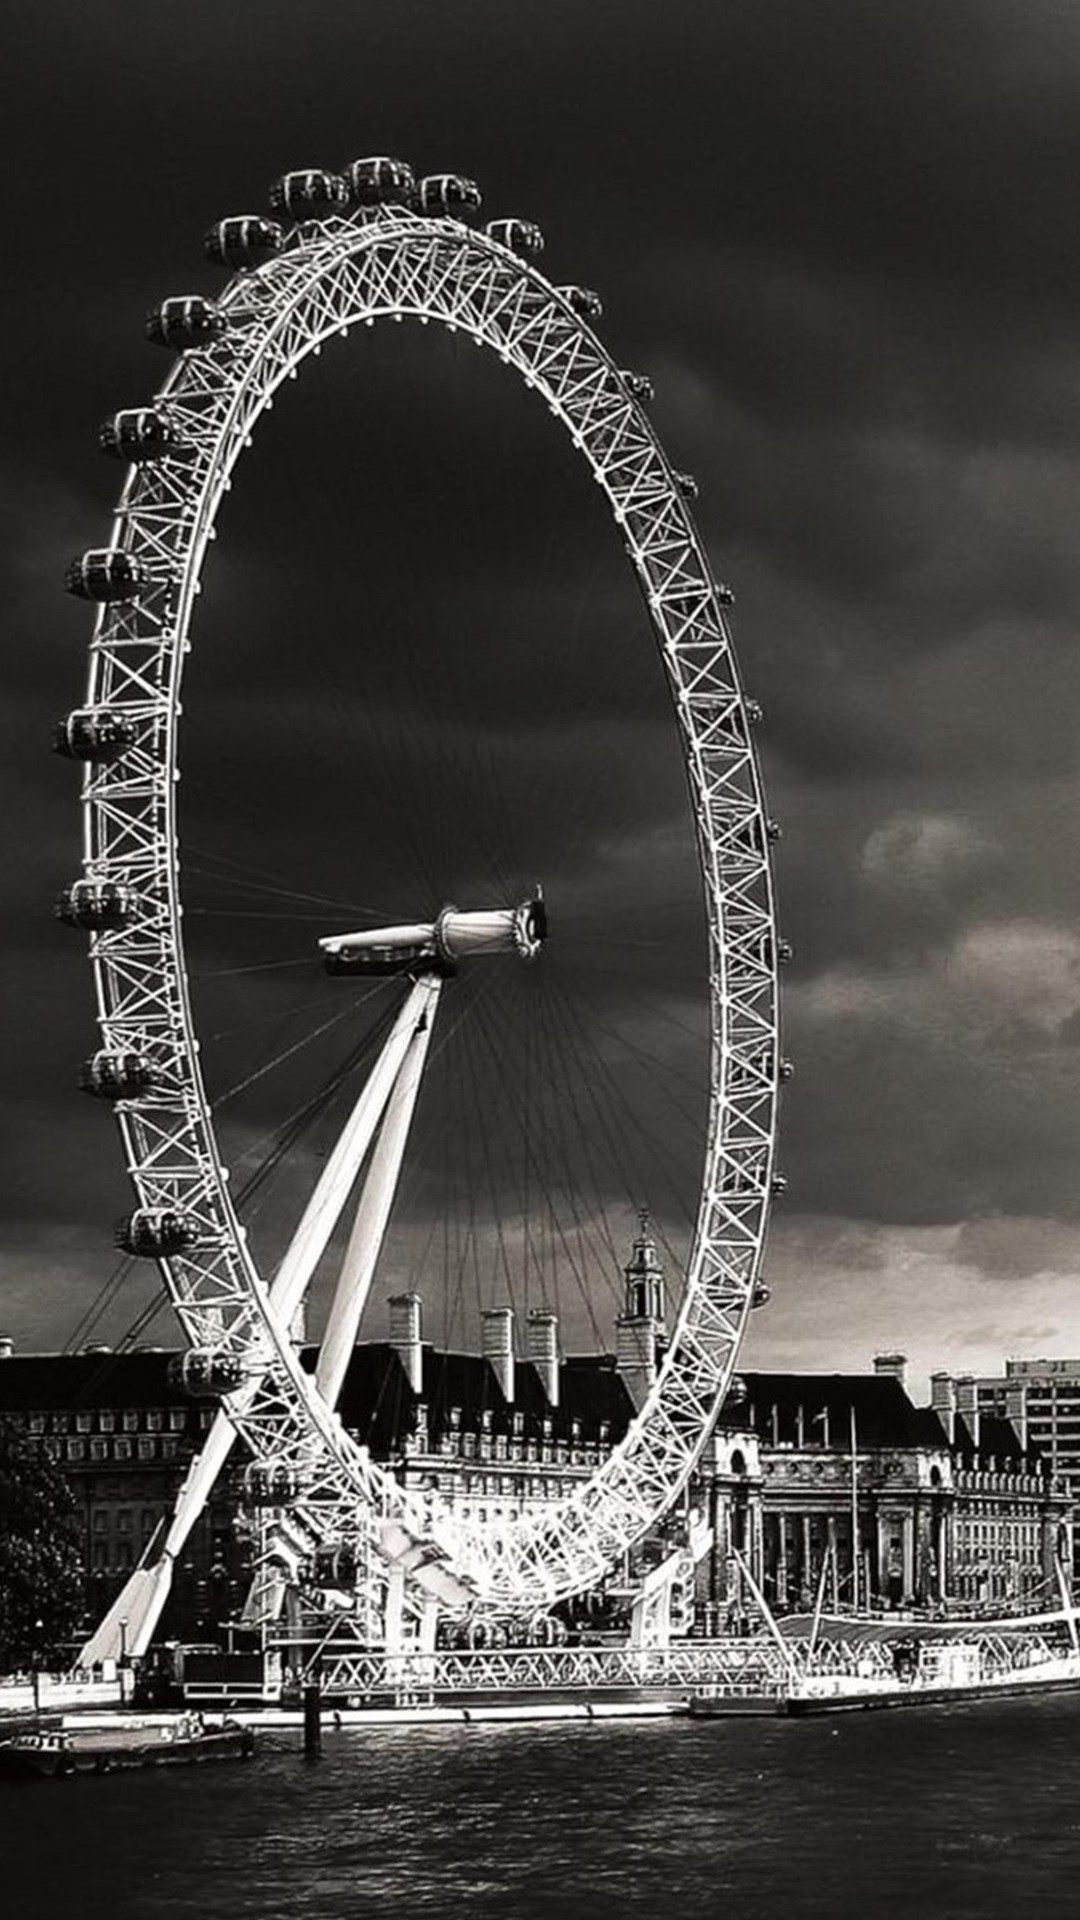 Wallpaper Weekends: London Sights for your iPhone 6 Plus